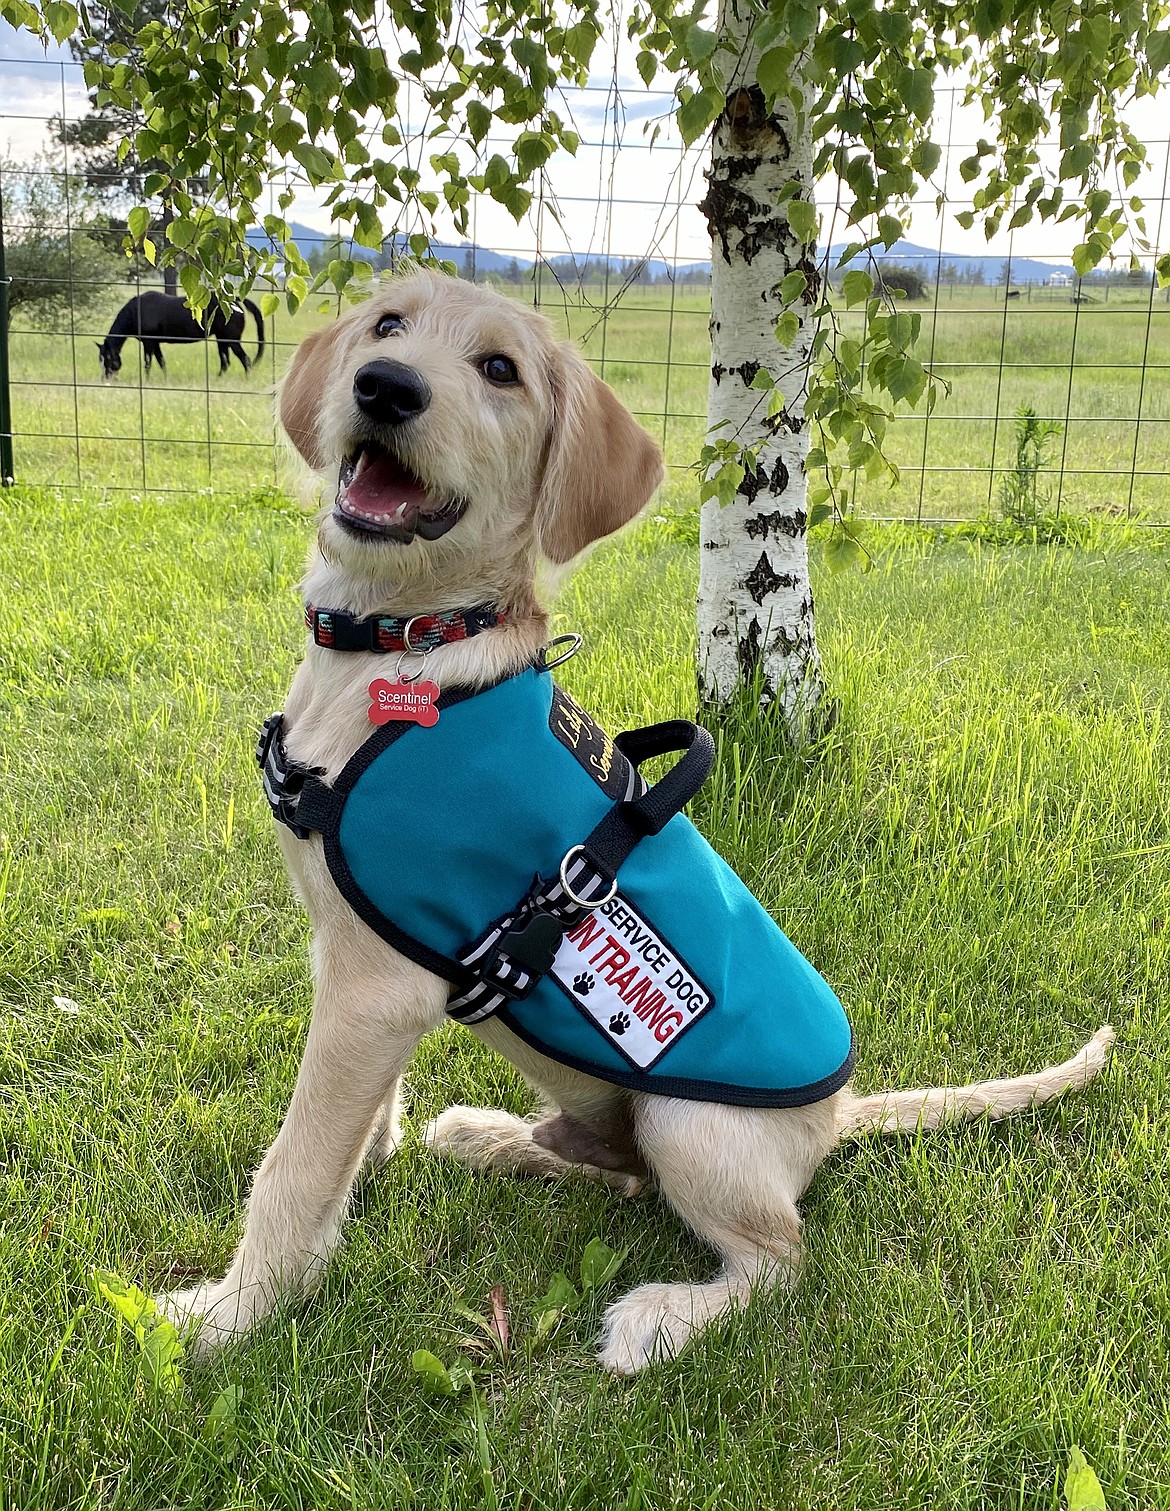 Scentinel, a goldendoodle/labrador mix, is being trained as a service dog to detect changes in blood sugar levels by his owner, Hayven Chase, who was diagnosed with Type 1 diabetes when she was 8 years old.